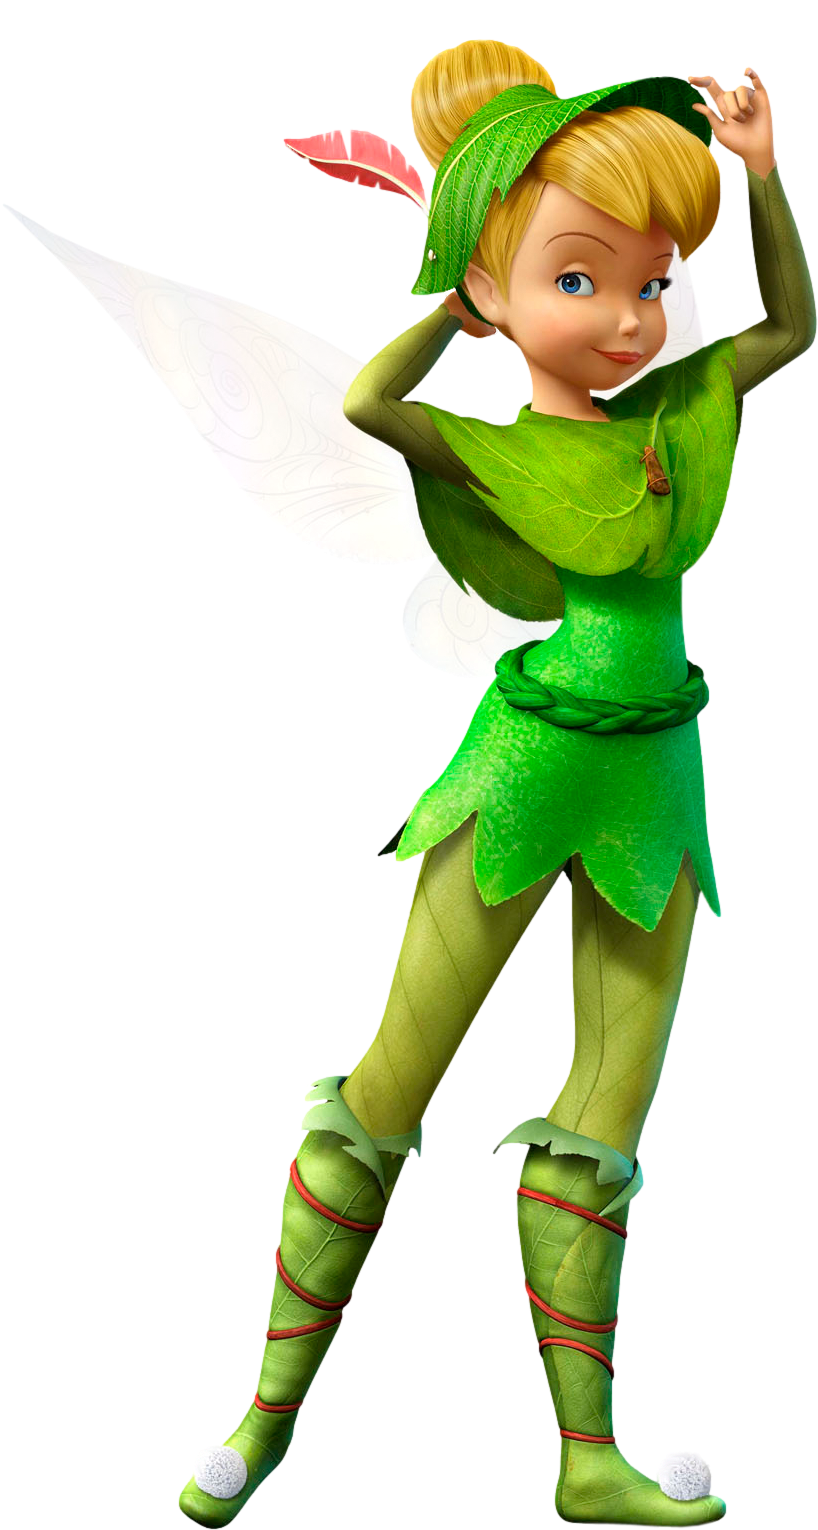 Transparent Tinkerbell Fairy Png Clipartu200b Gallery - Tinkerbell And The Lost Treasure (935x1616)